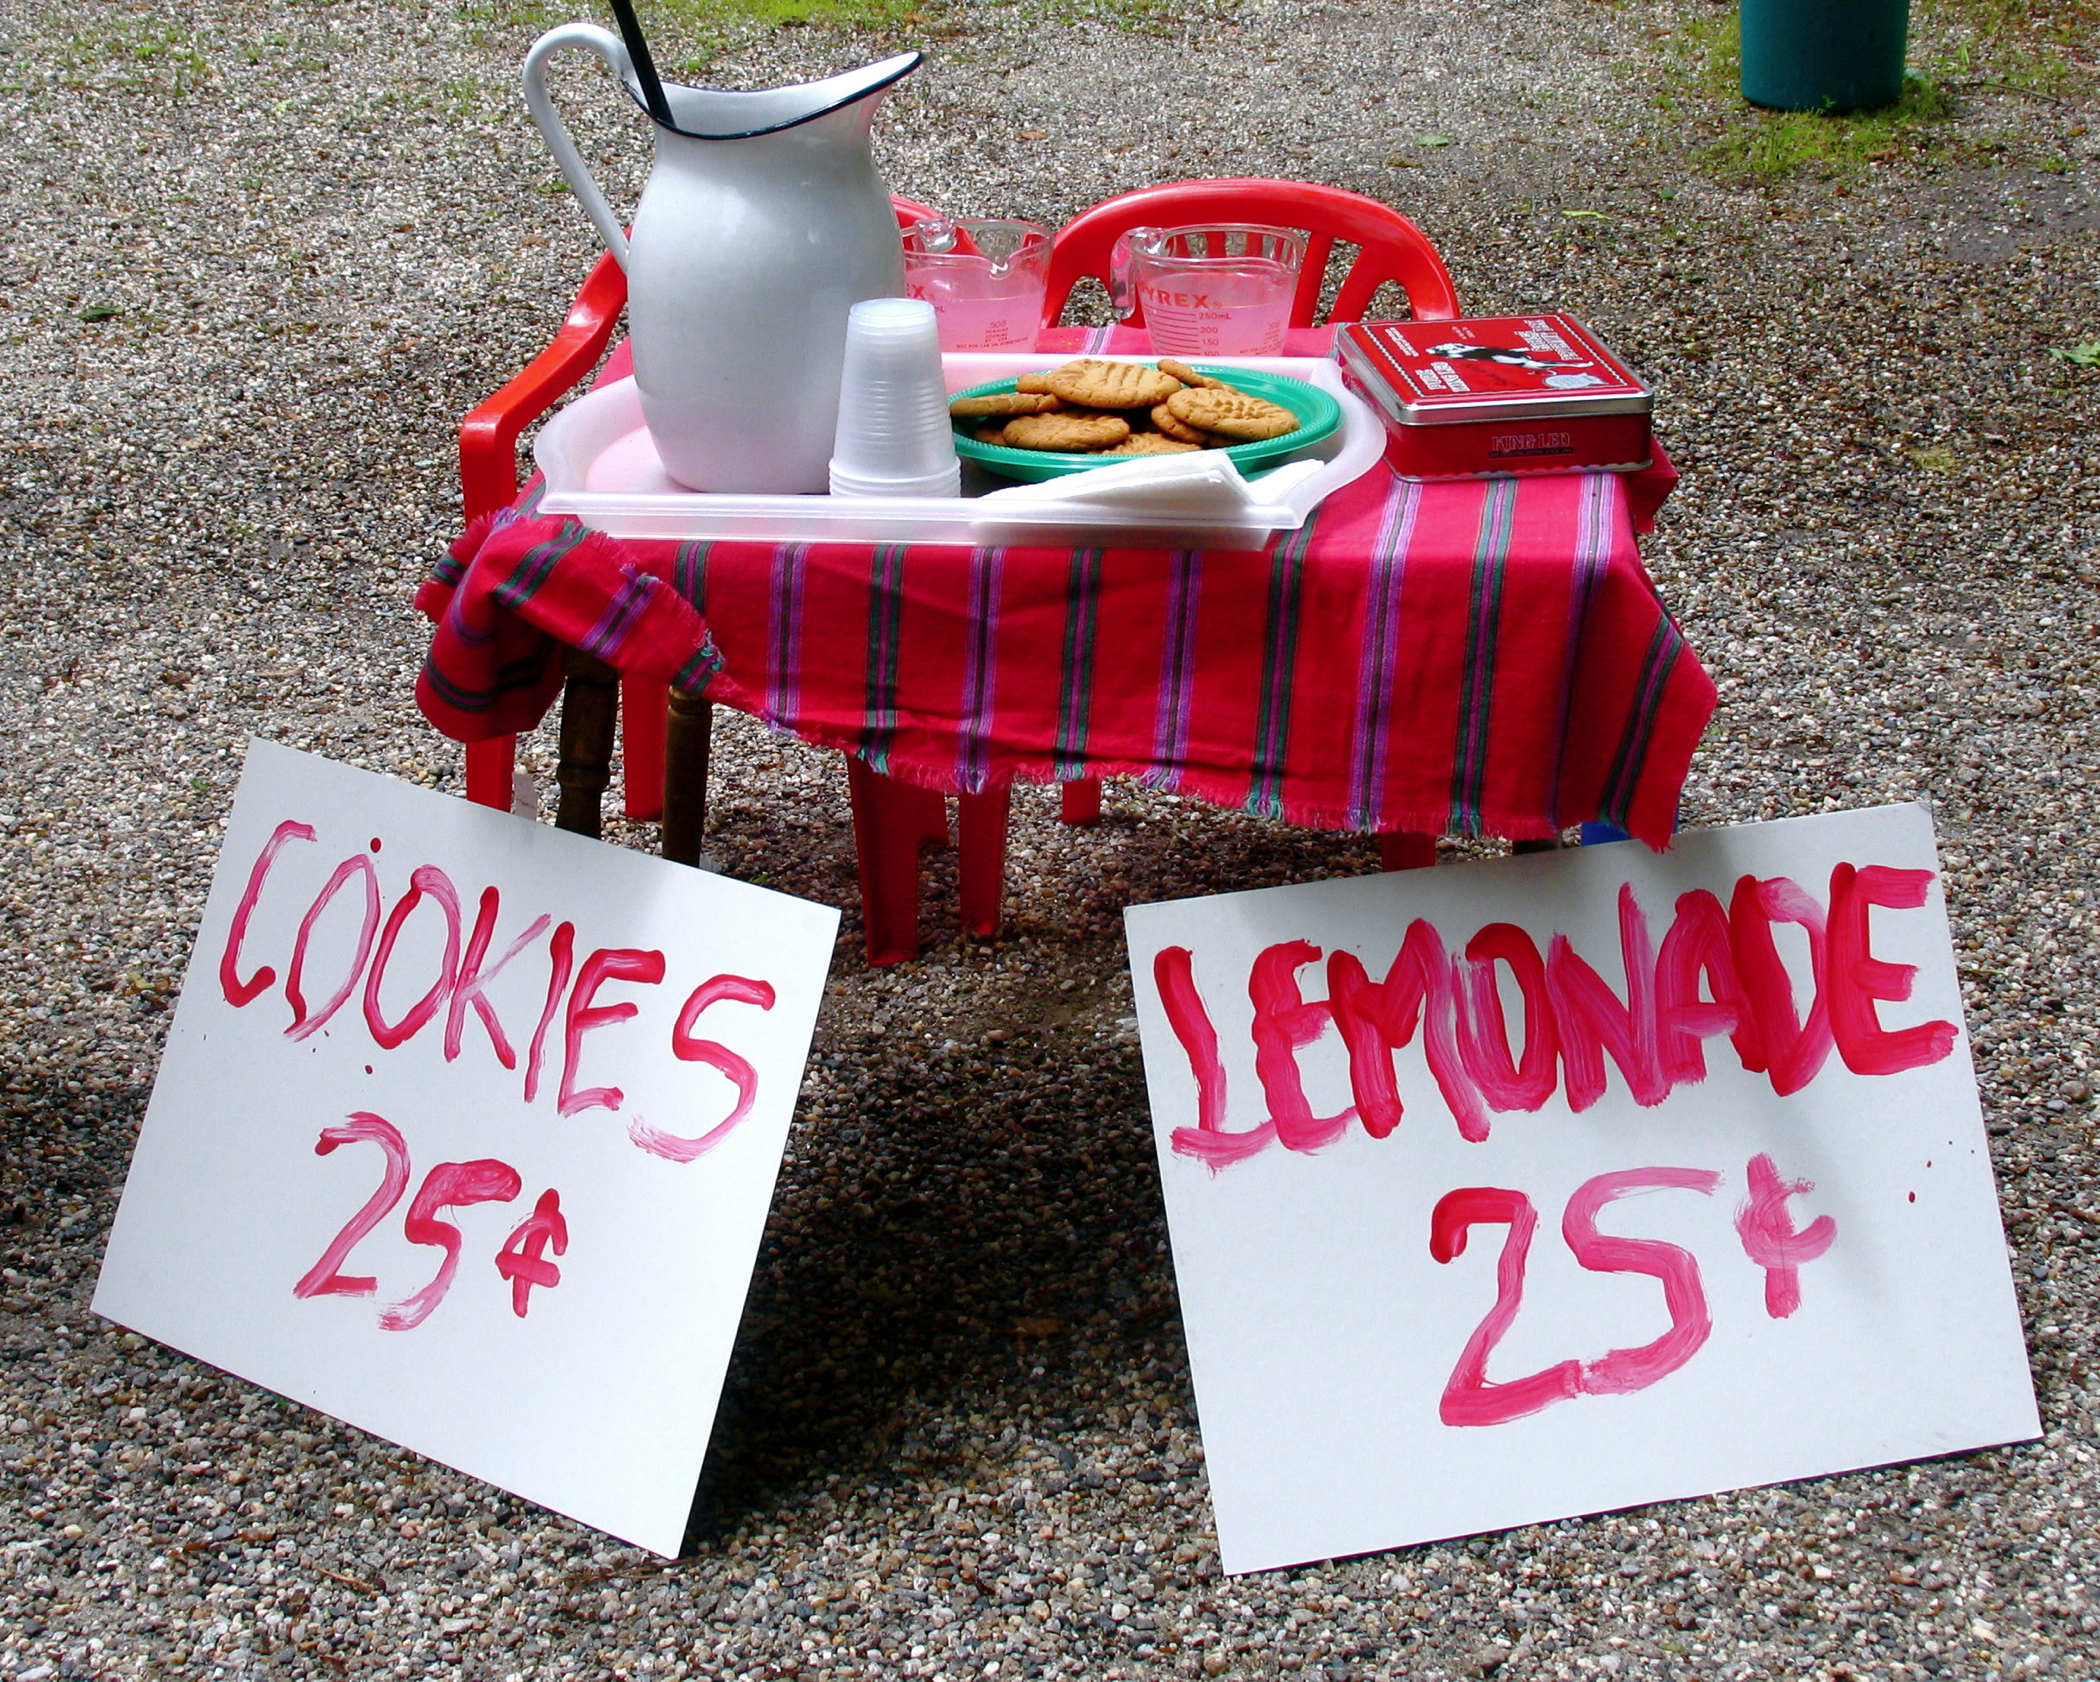 Lemonade And Cookies Stand (user submitted)